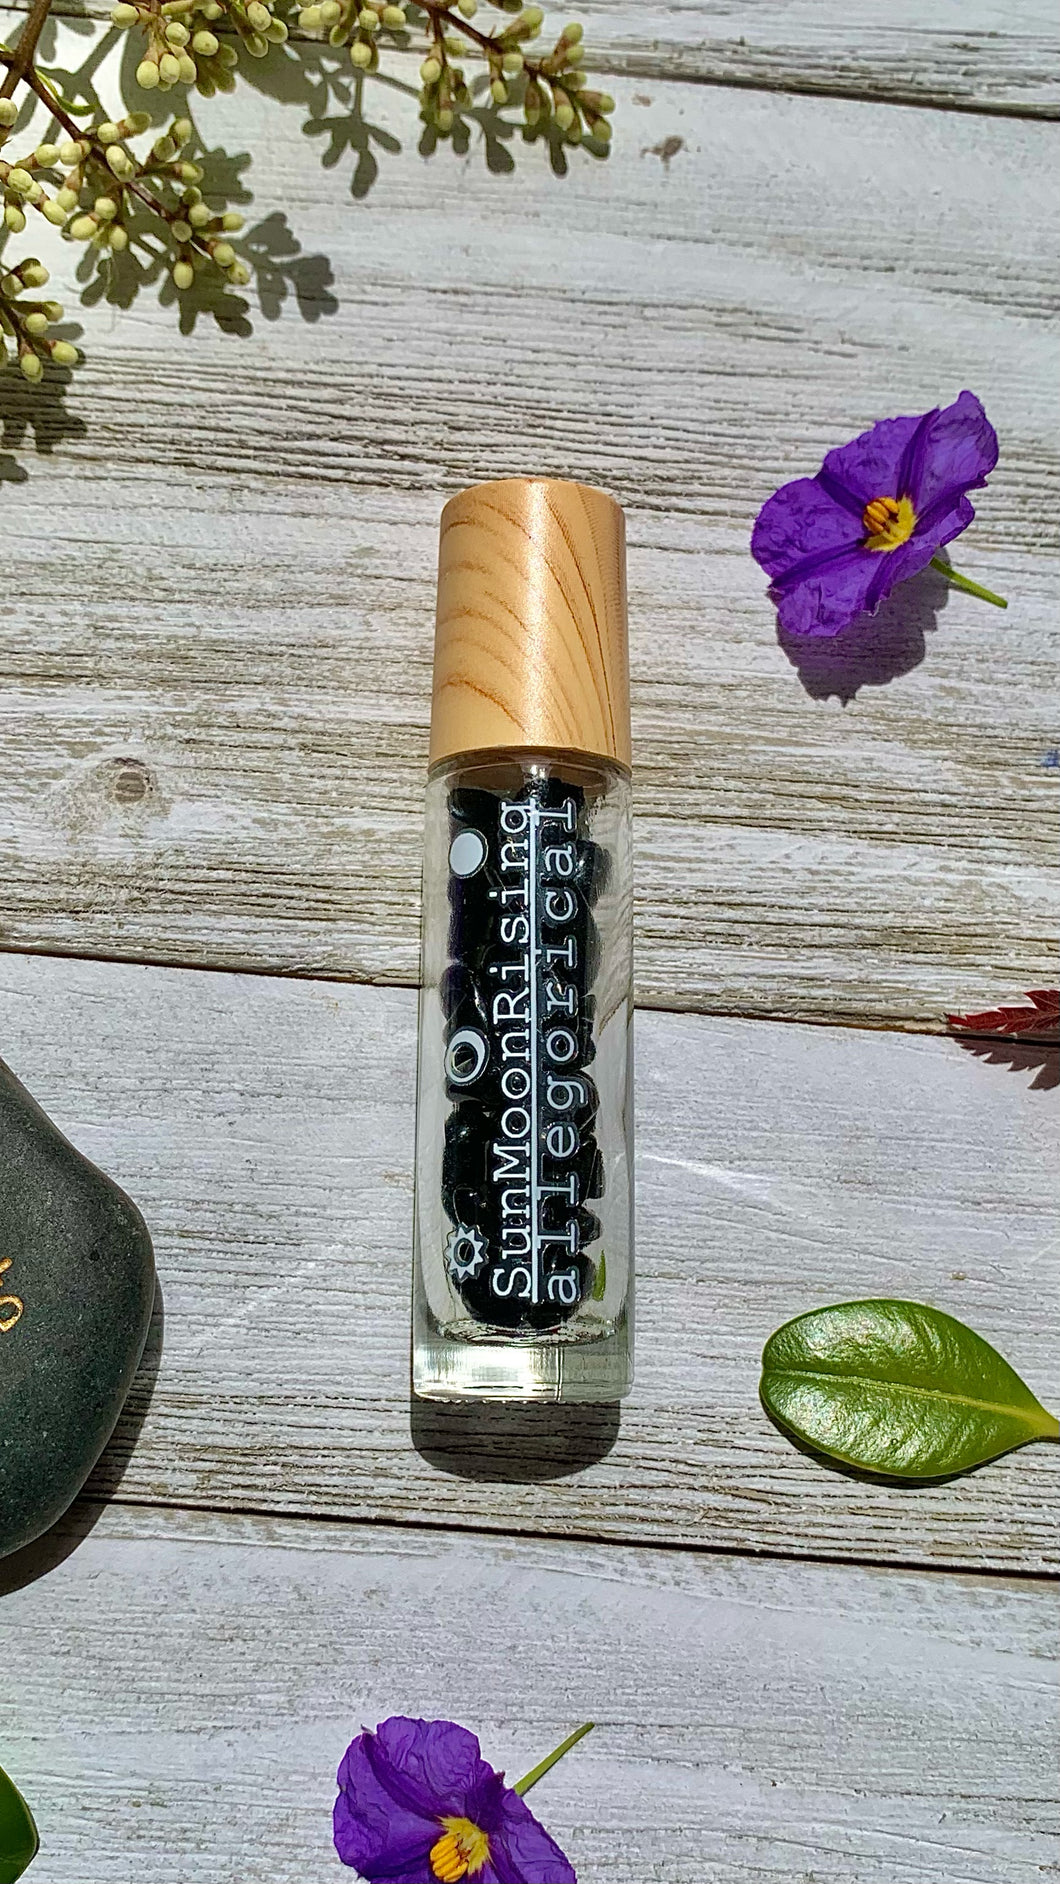 Obsidian Healing Crystal Aroma Therapy